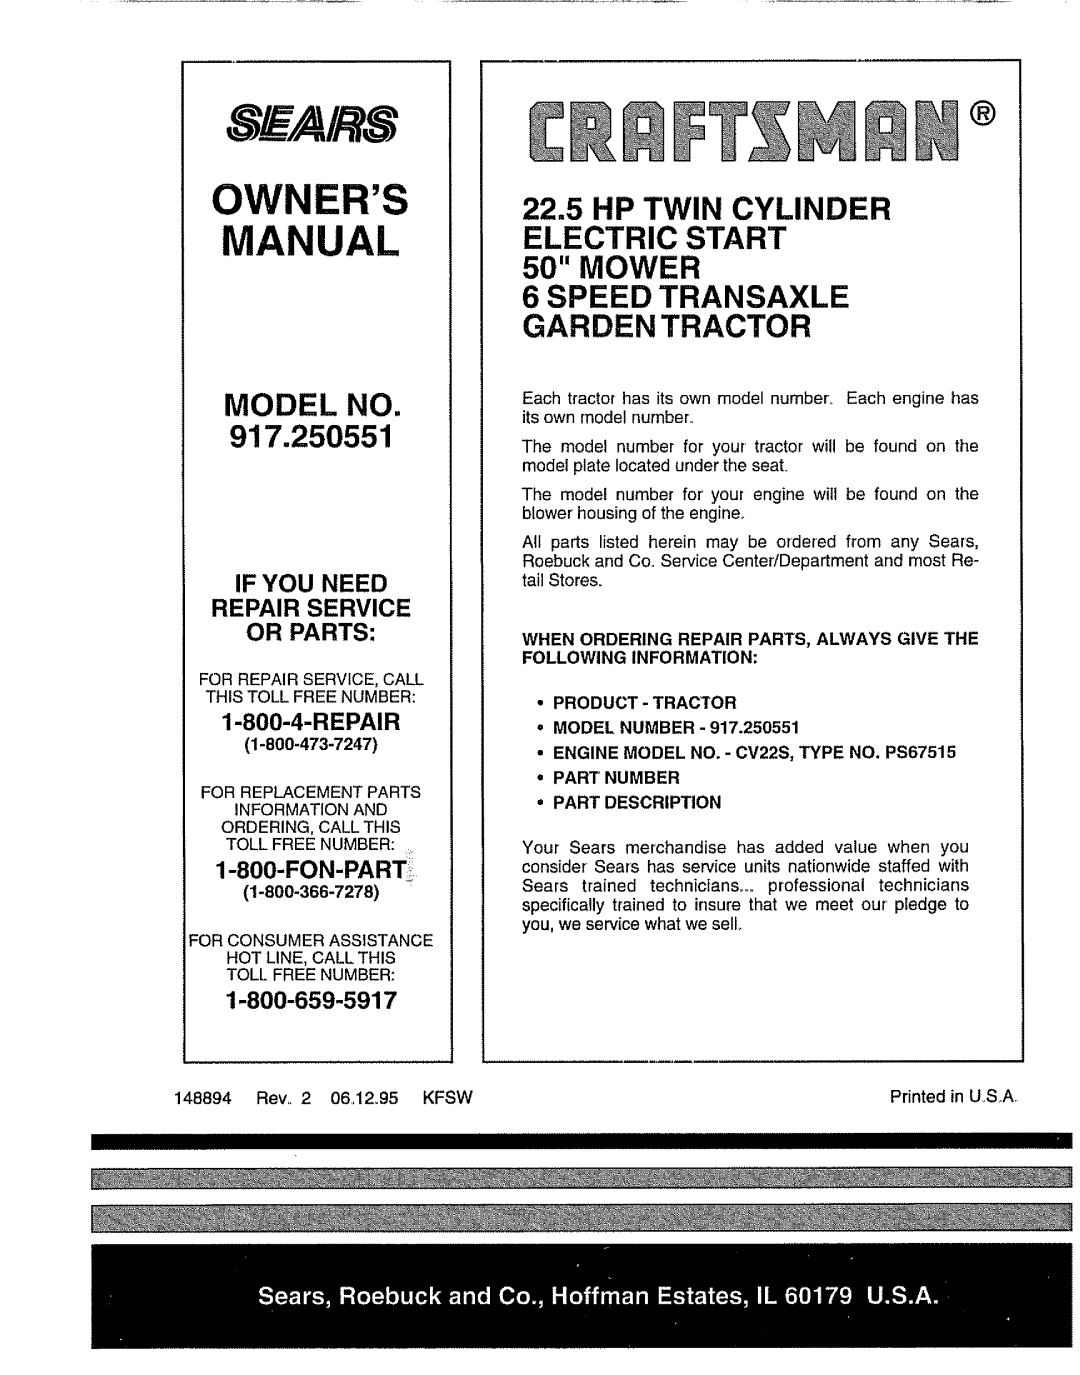 Sears 917.250551 Owners Manual, Model No, 22.5HP TWIN CYLINDER ELECTRIC START, MOWER 6 SPEED TRANSAXLE GARDEN TRACTOR 